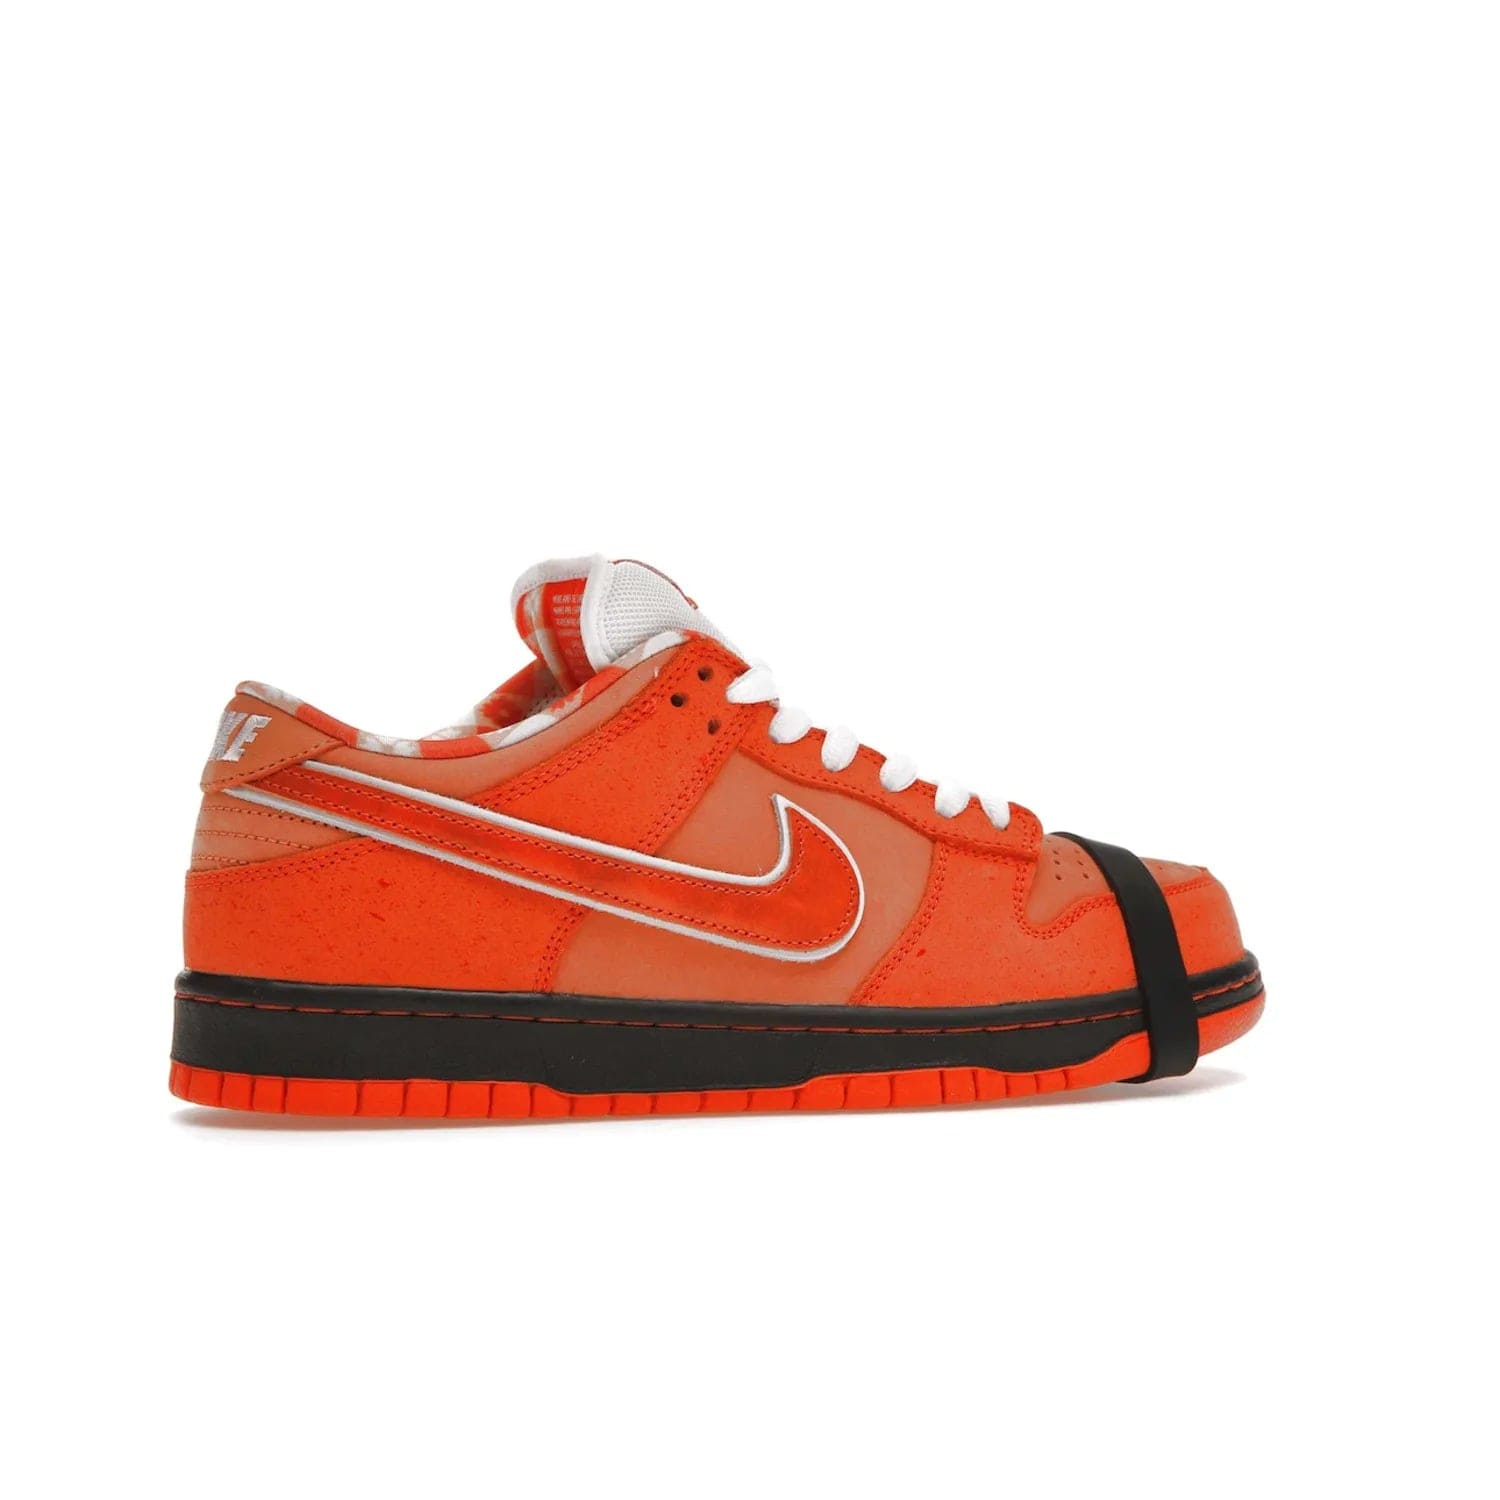 Nike SB Dunk Low Concepts Orange Lobster - Image 35 - Only at www.BallersClubKickz.com - Make a statement with the Nike SB Dunk Low Concepts Orange Lobster. Variety of orange hues, nubuck upper, bib-inspired lining & rubber outsole create bold look & comfortable blend of style. Available December 20th, 2022.